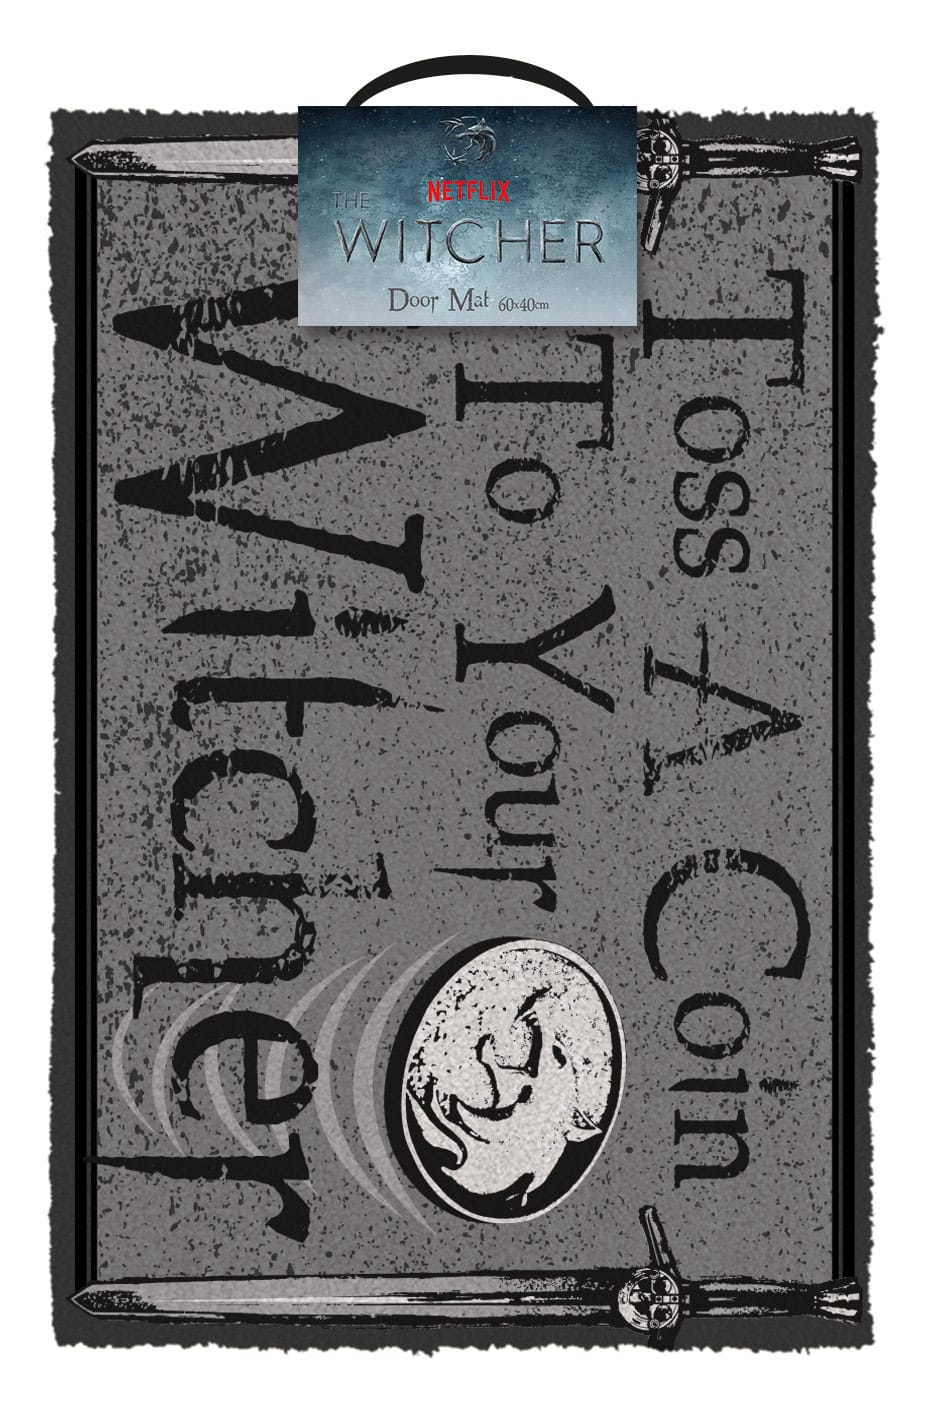 The Witcher - Toss a Coin to your Witcher Doormat